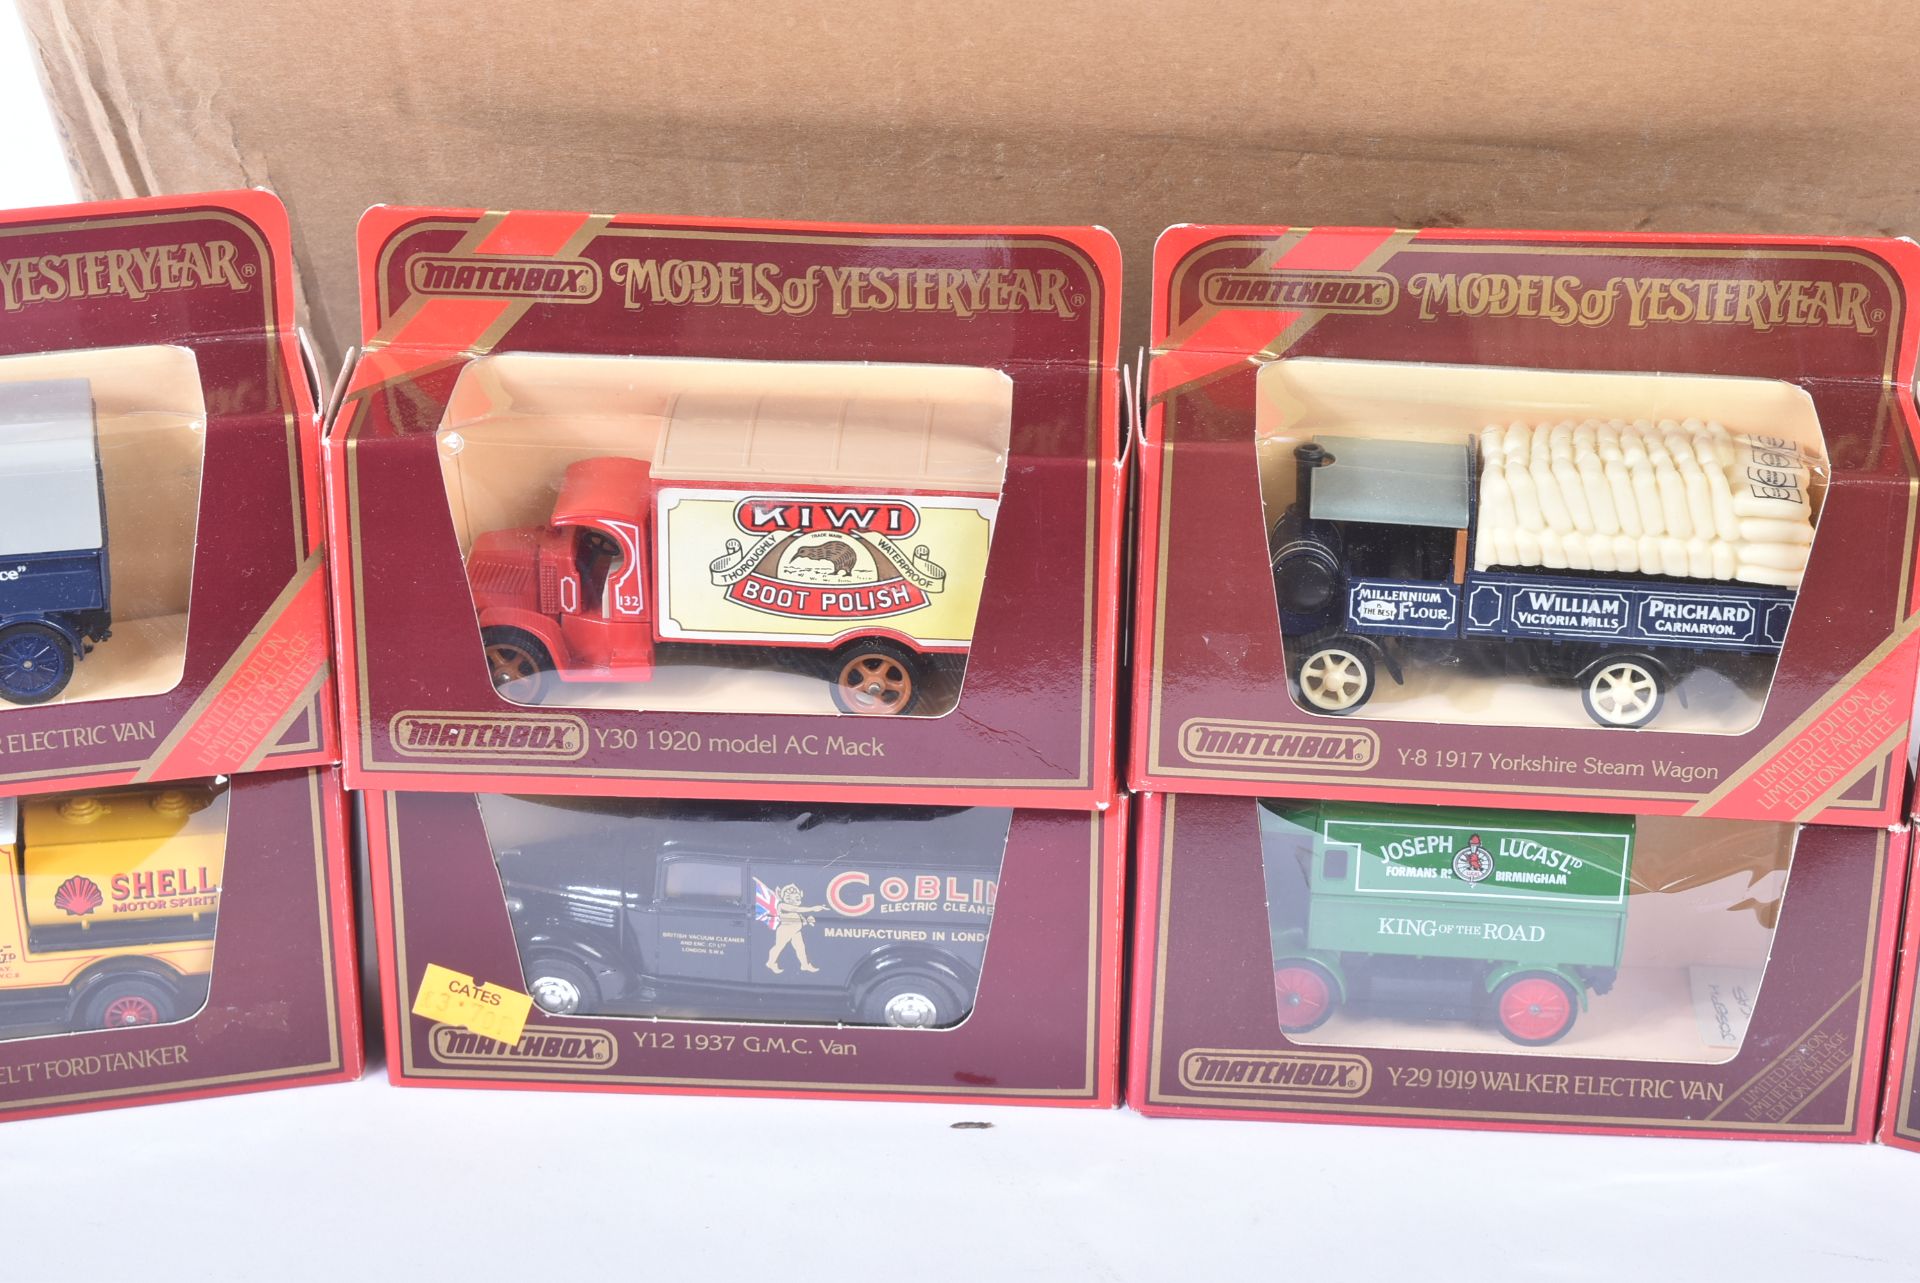 LARGE COLLECTION OF MATCHBOX MODELS OF YESTERYEAR DIECAST - Image 3 of 8